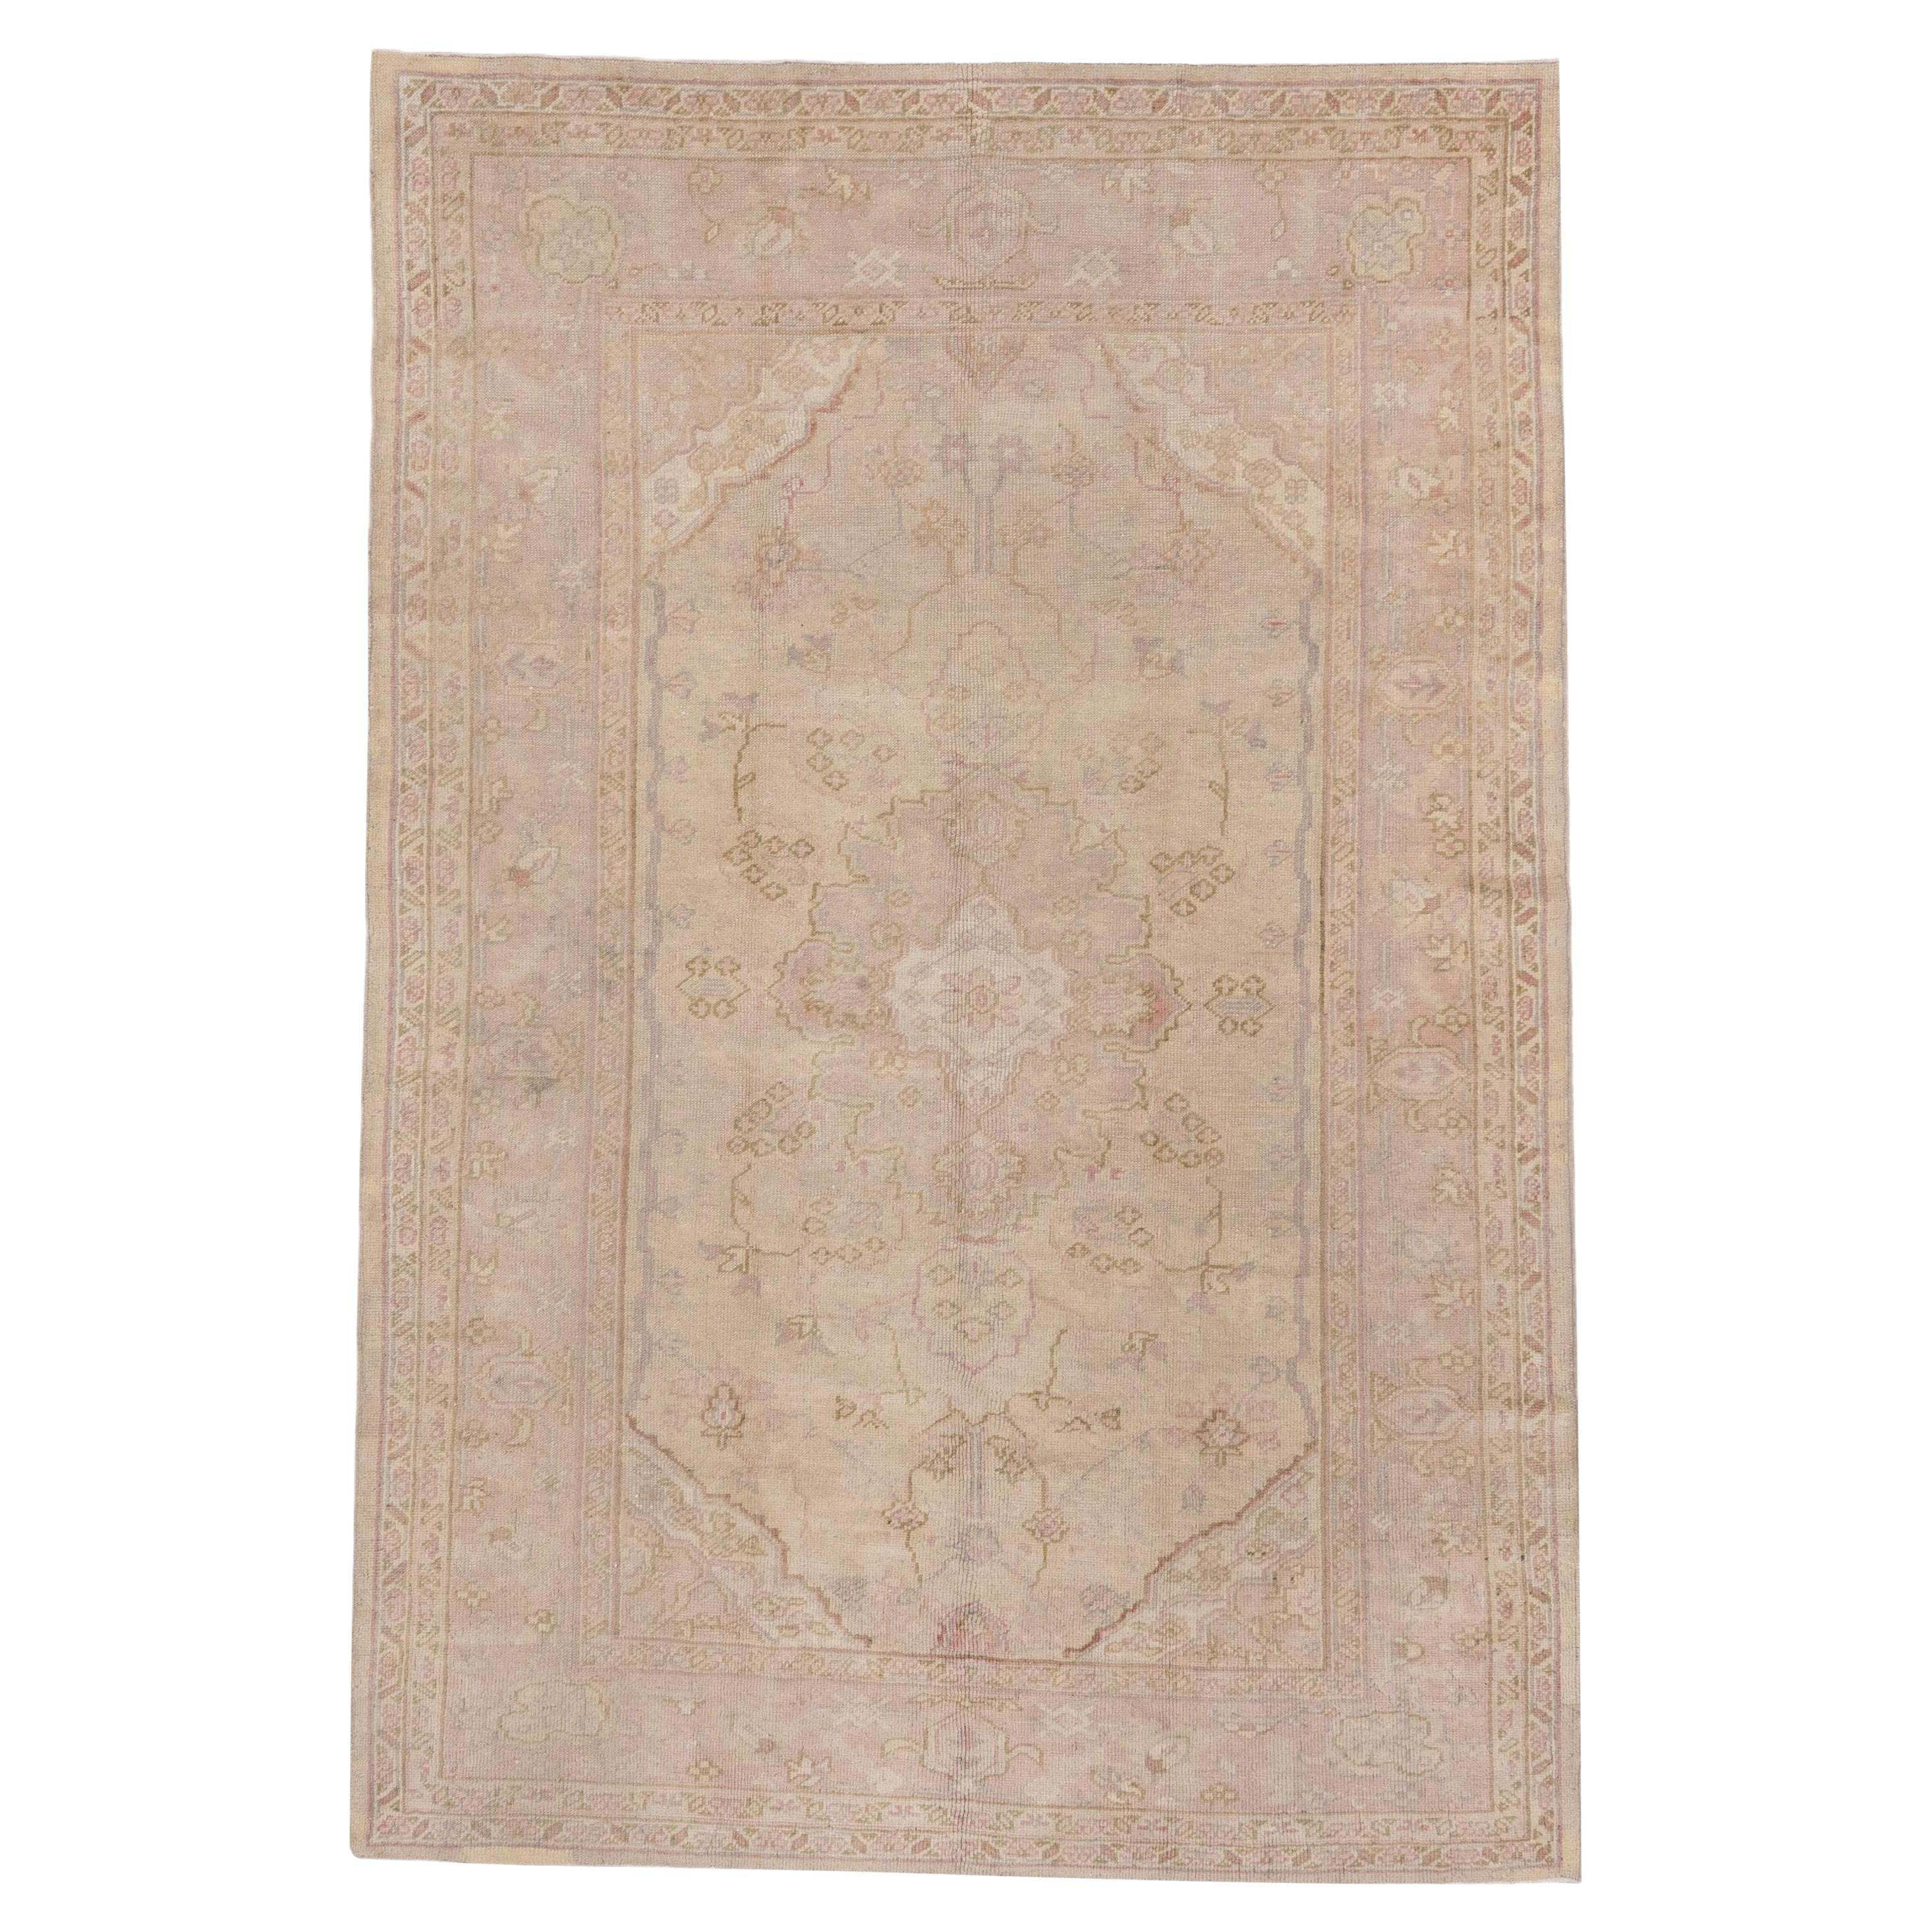 Antique Turkish Oushak Rug with a Soft Palette, Light Purple and Pink Tones